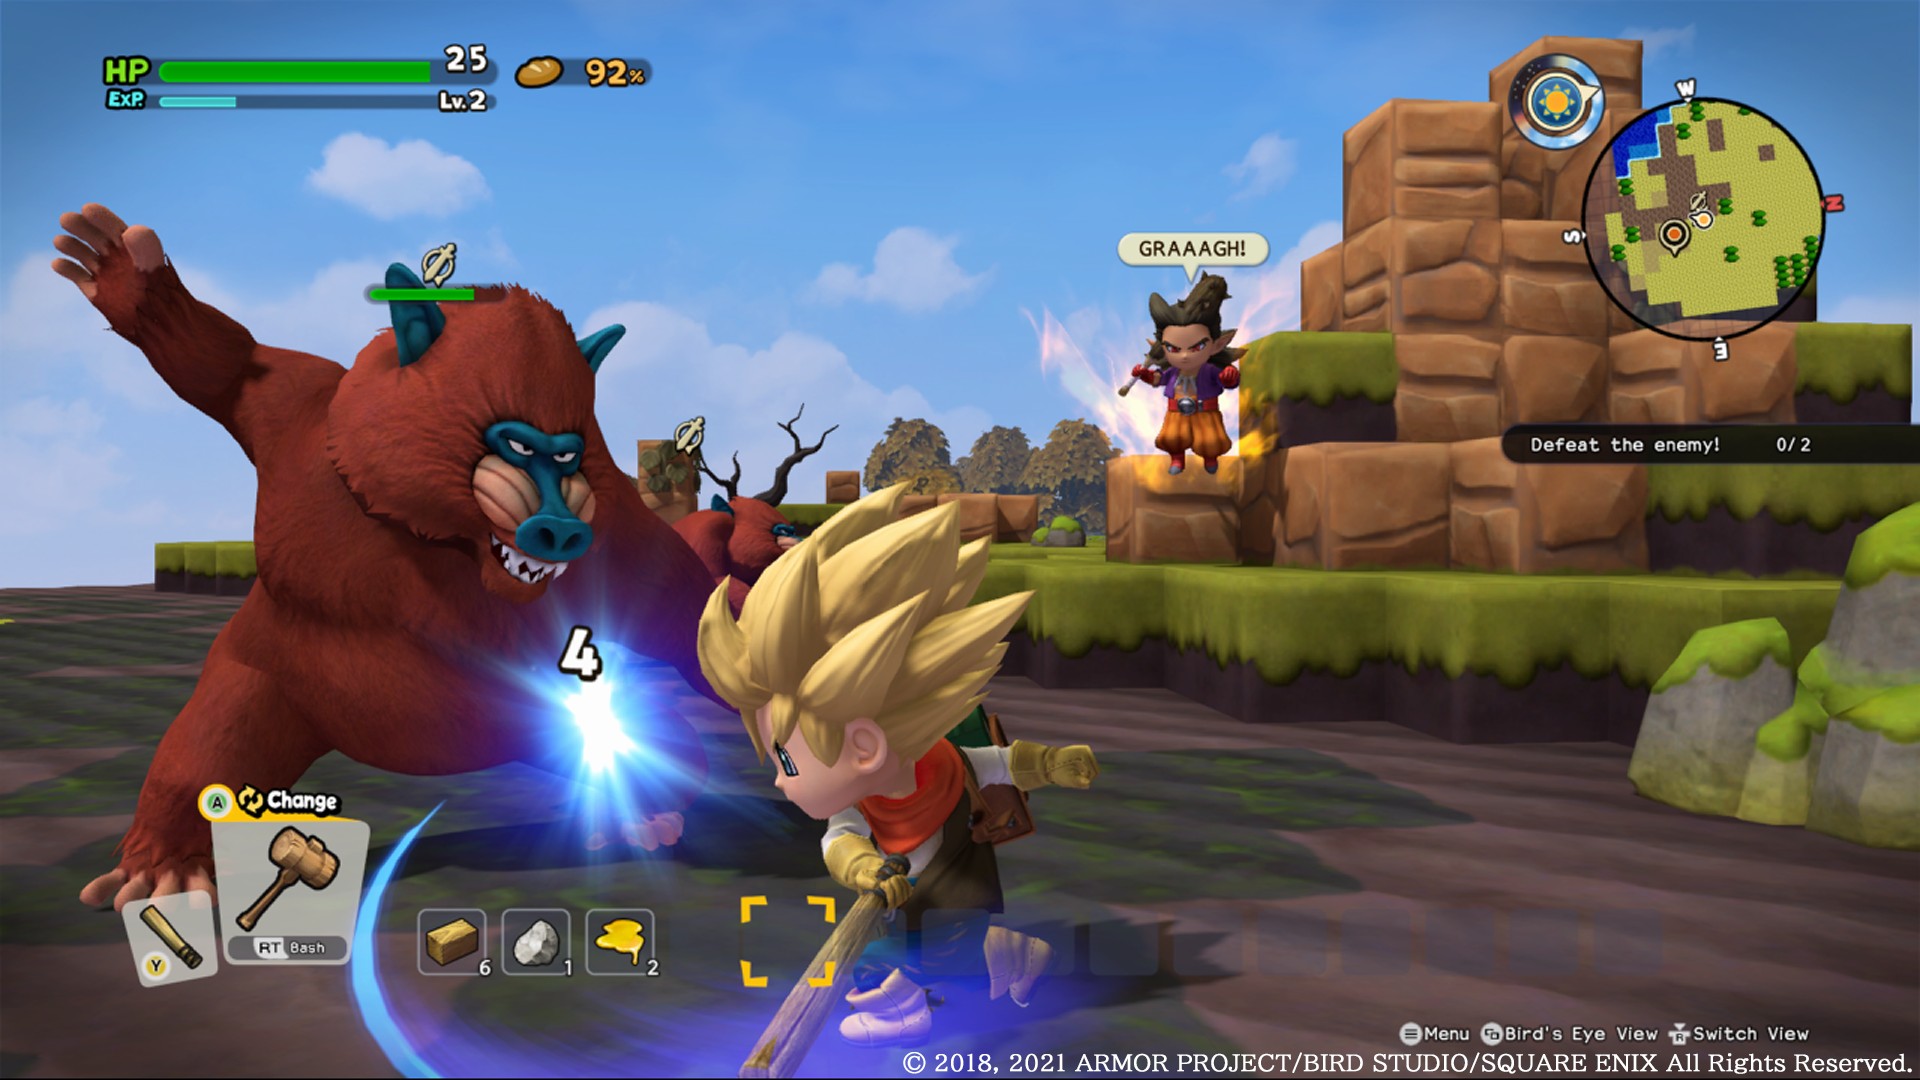 become-the-master-builder-with-dragon-quest-builders-2-and-xbox-game-pass-on-may-4-xbox-wire